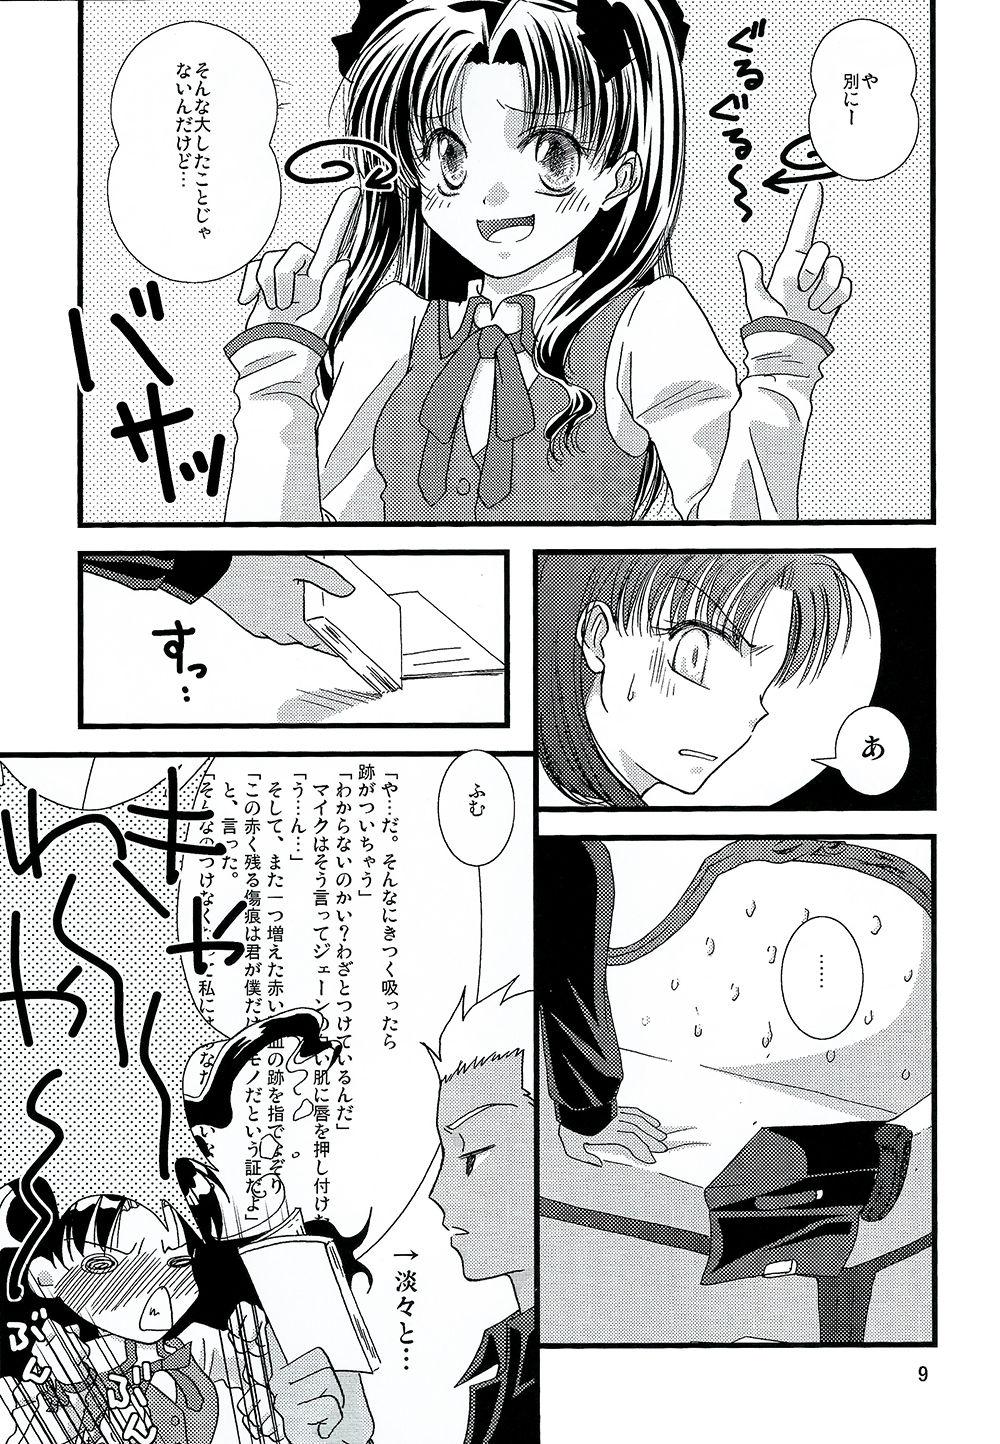 Follando Kyuurinbon. The thing which remains - Fate stay night Menage - Page 6